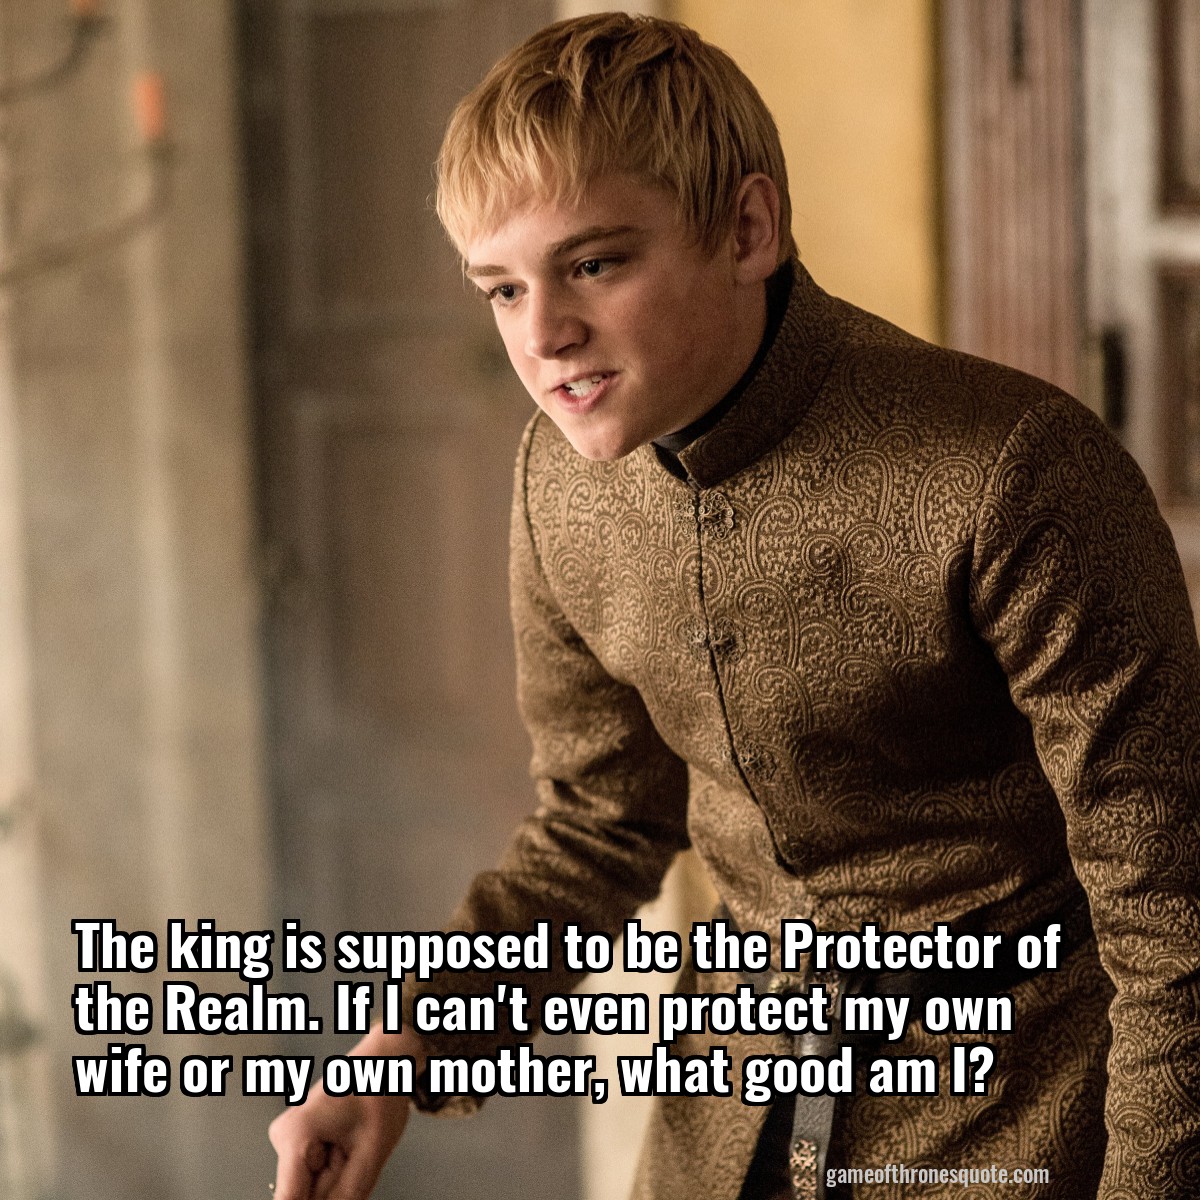 The king is supposed to be the Protector of the Realm. If I can't even protect my own wife or my own mother, what good am I?